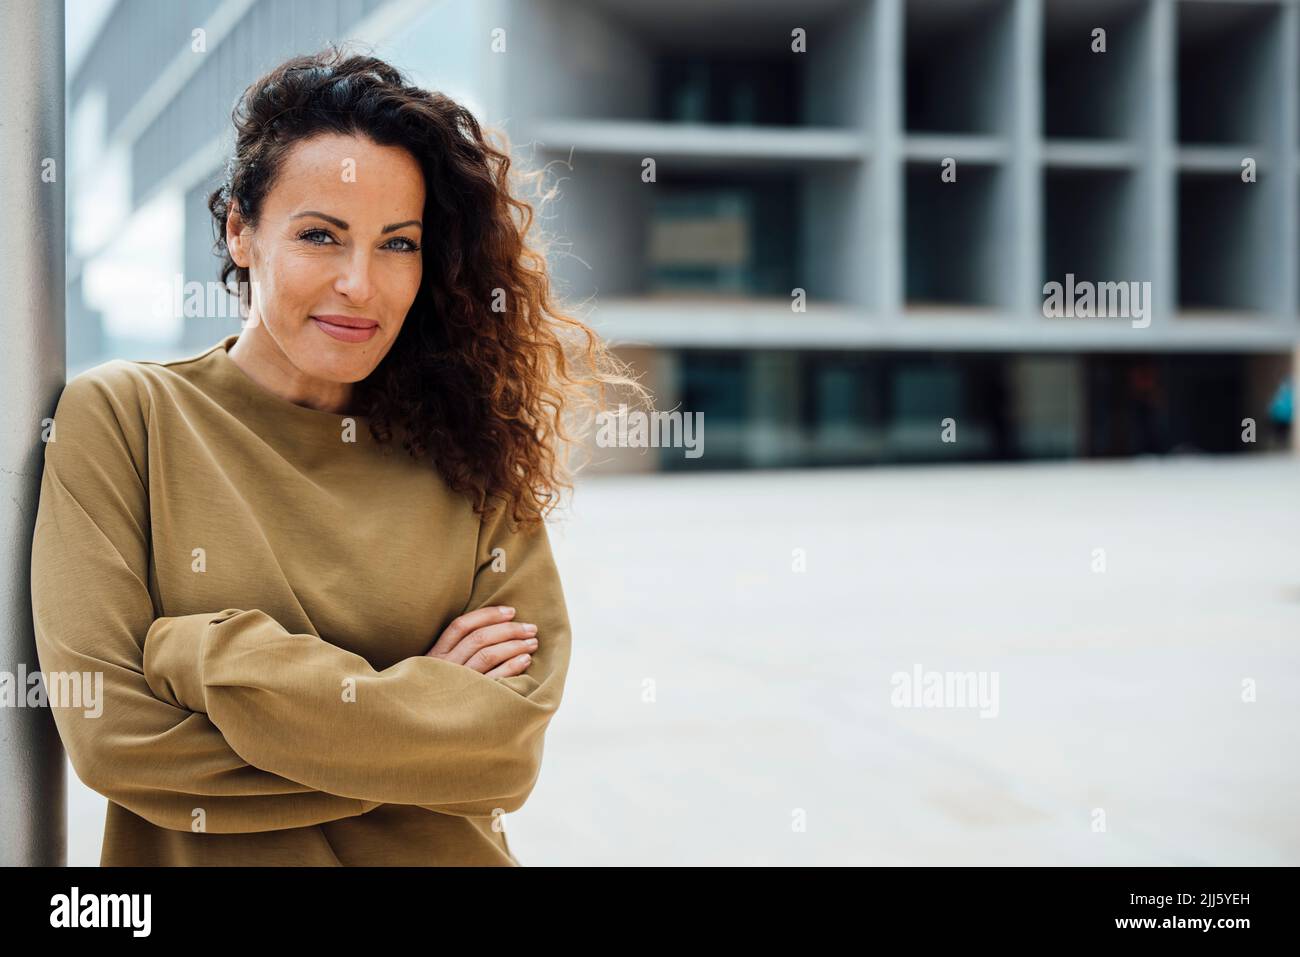 Smiling woman with arms crossed leaning on pole Stock Photo